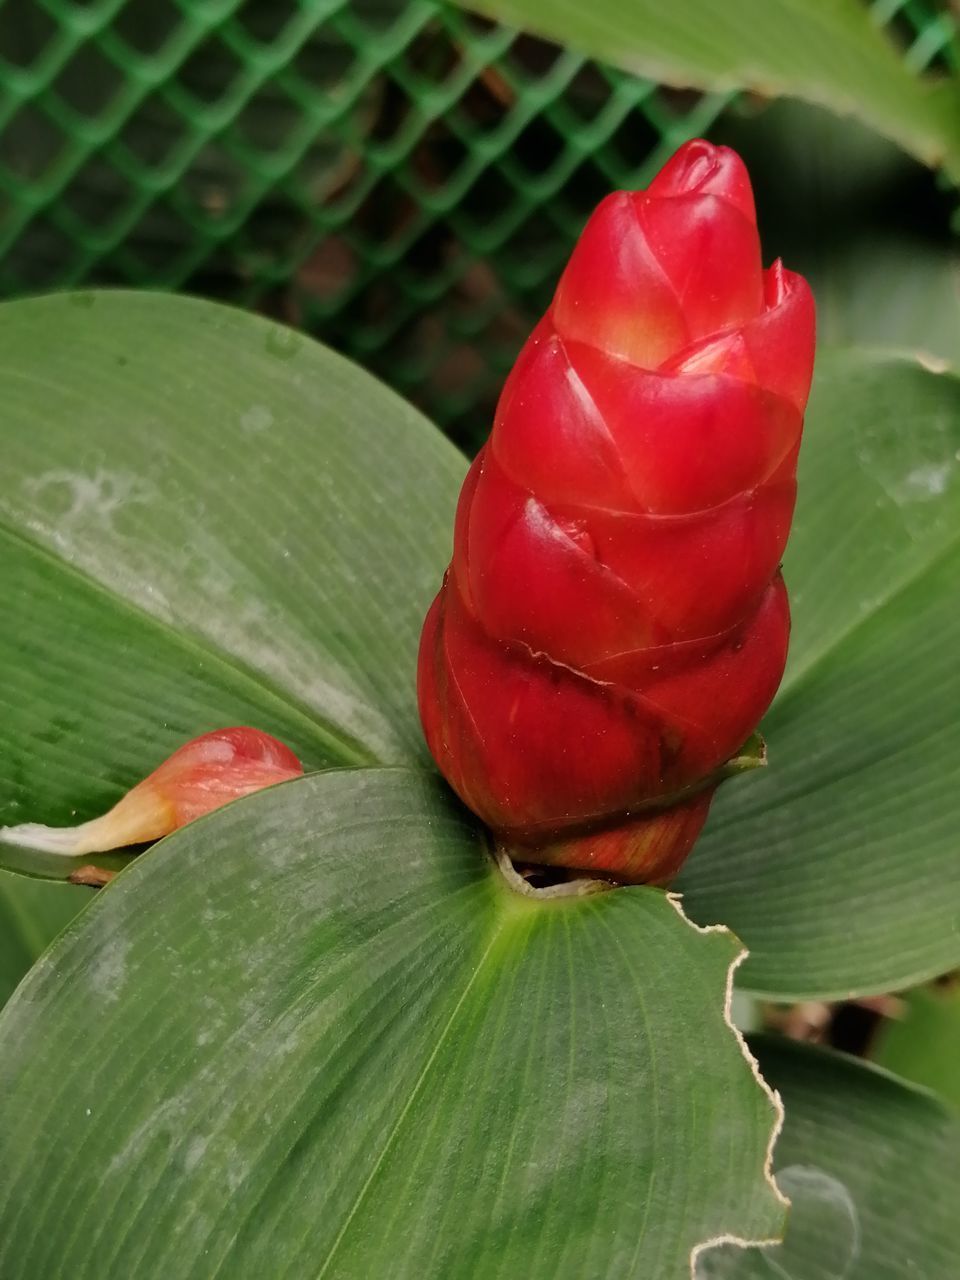 CLOSE-UP OF RED FLOWER GROWING ON PLANT